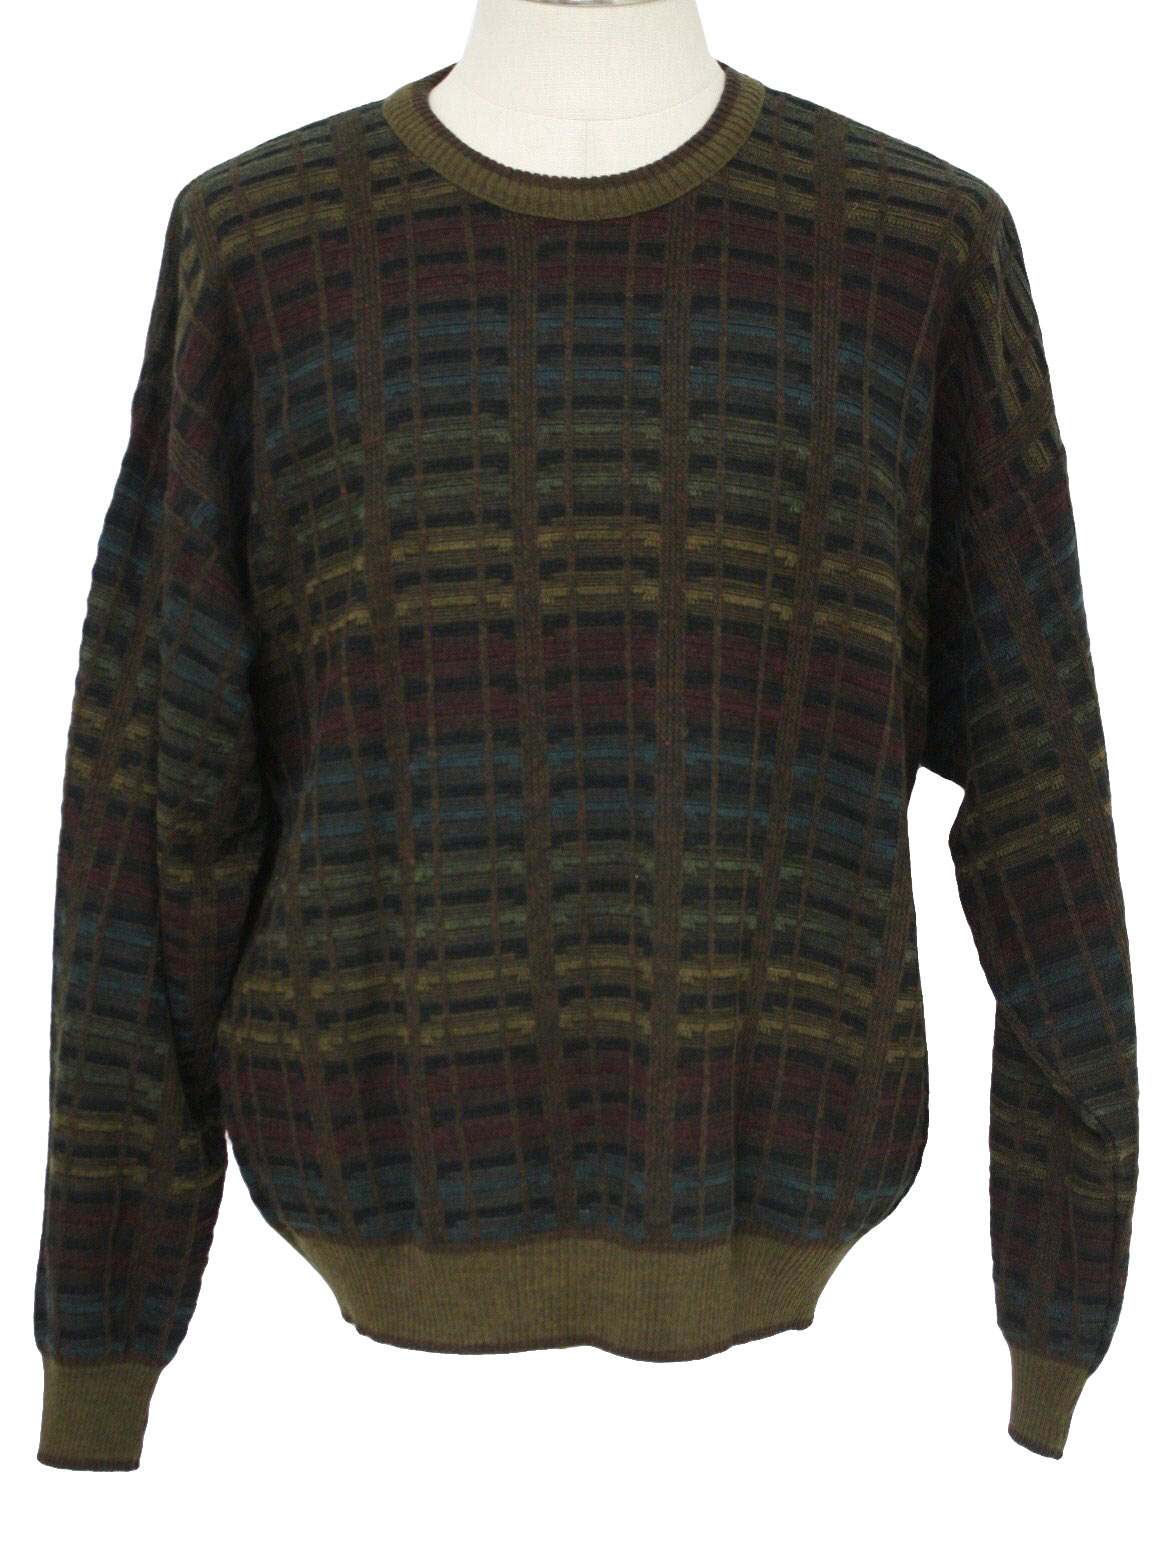 Retro 1980s Sweater: 80s -Alfant- Mens browns, black, maroon, green and ...